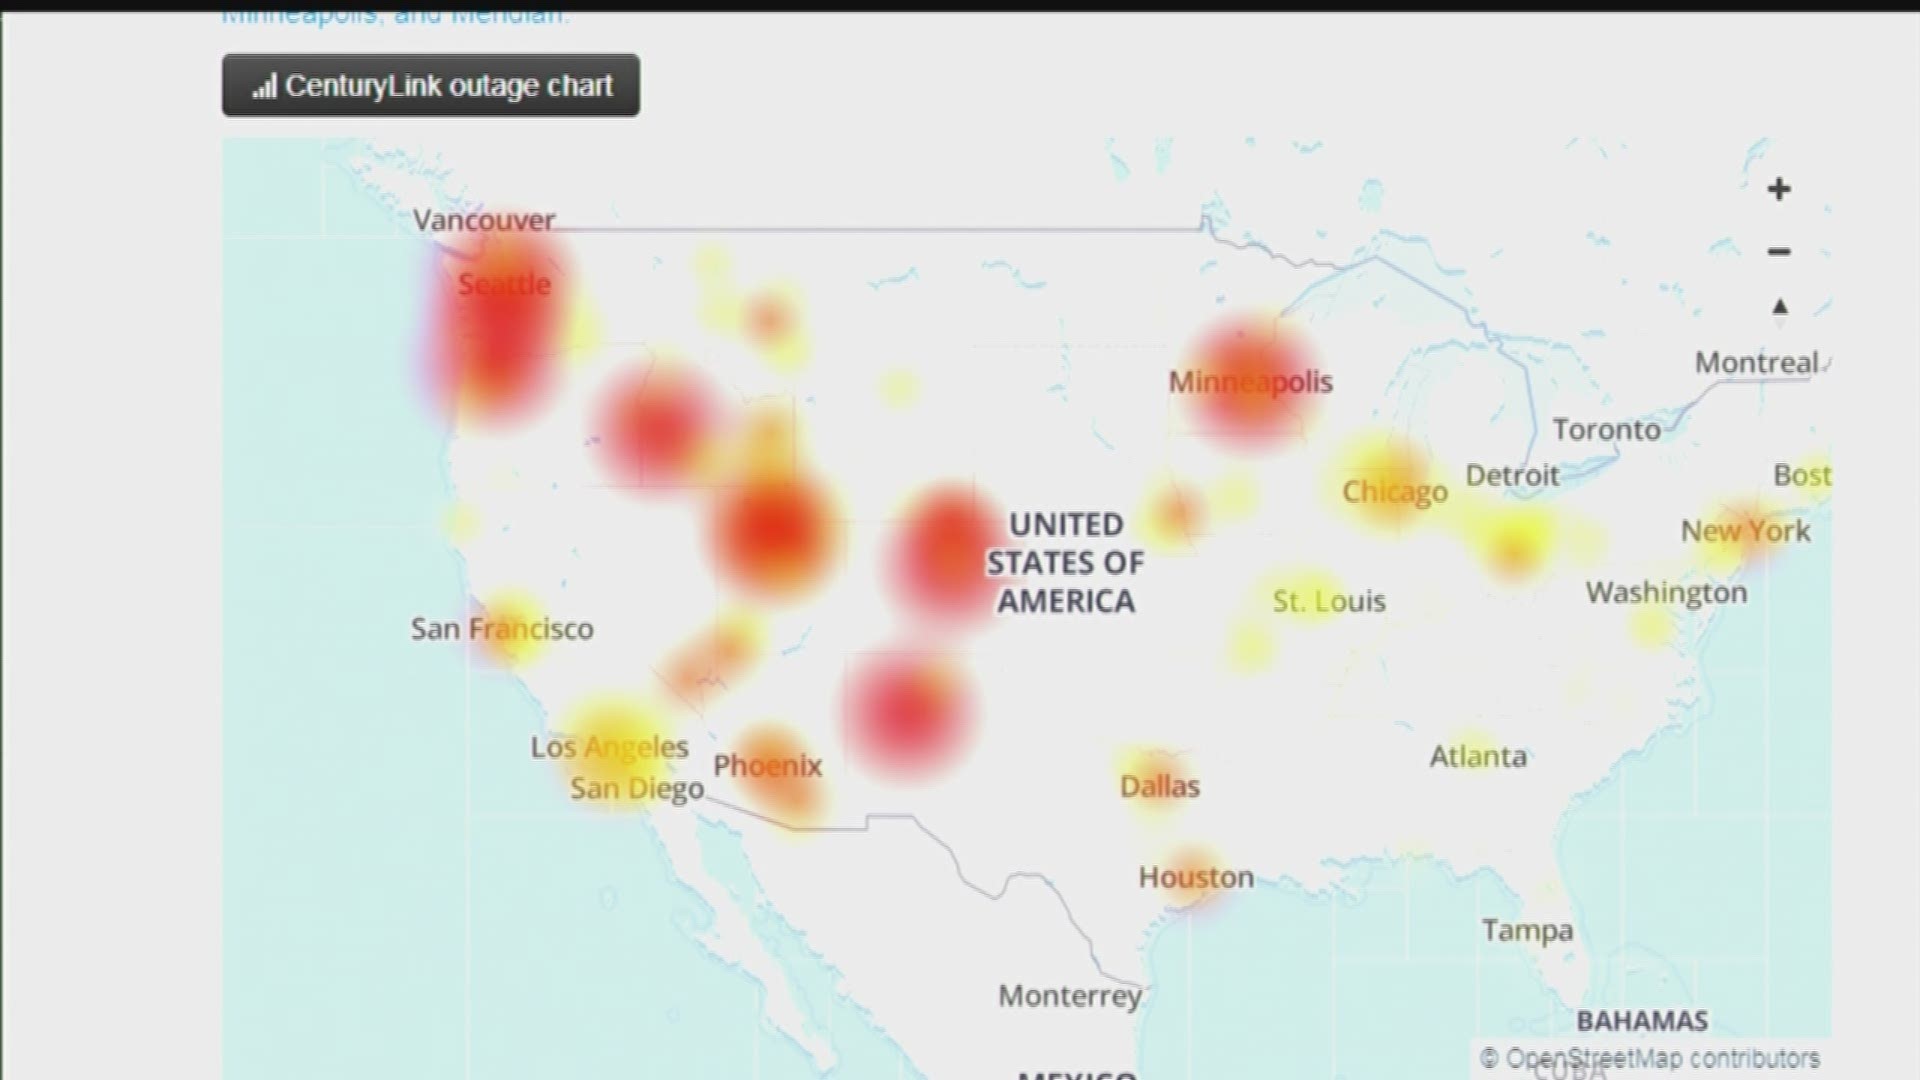 CenturyLink outage across the country